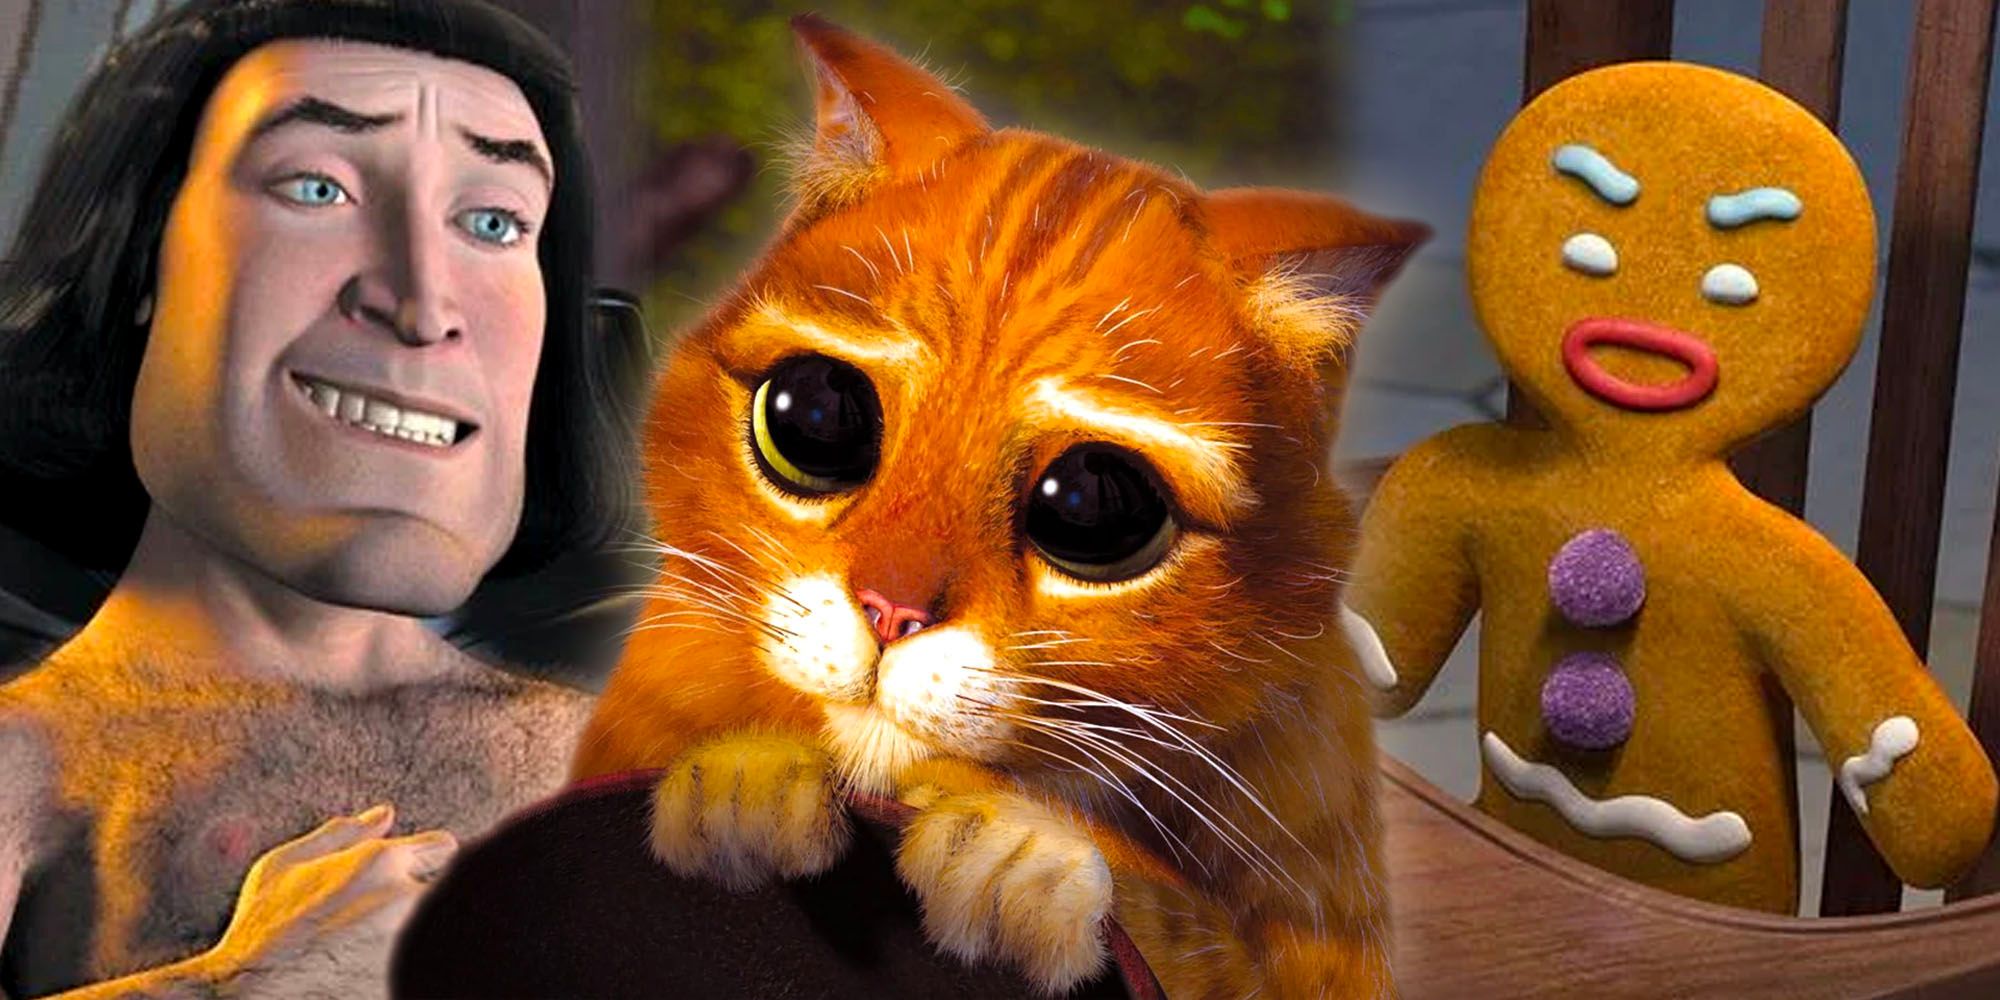 A collage of Lord Farquad in bed, Puss in Boots looking cute and Gingerbread Man looking angry in the Shrek movies